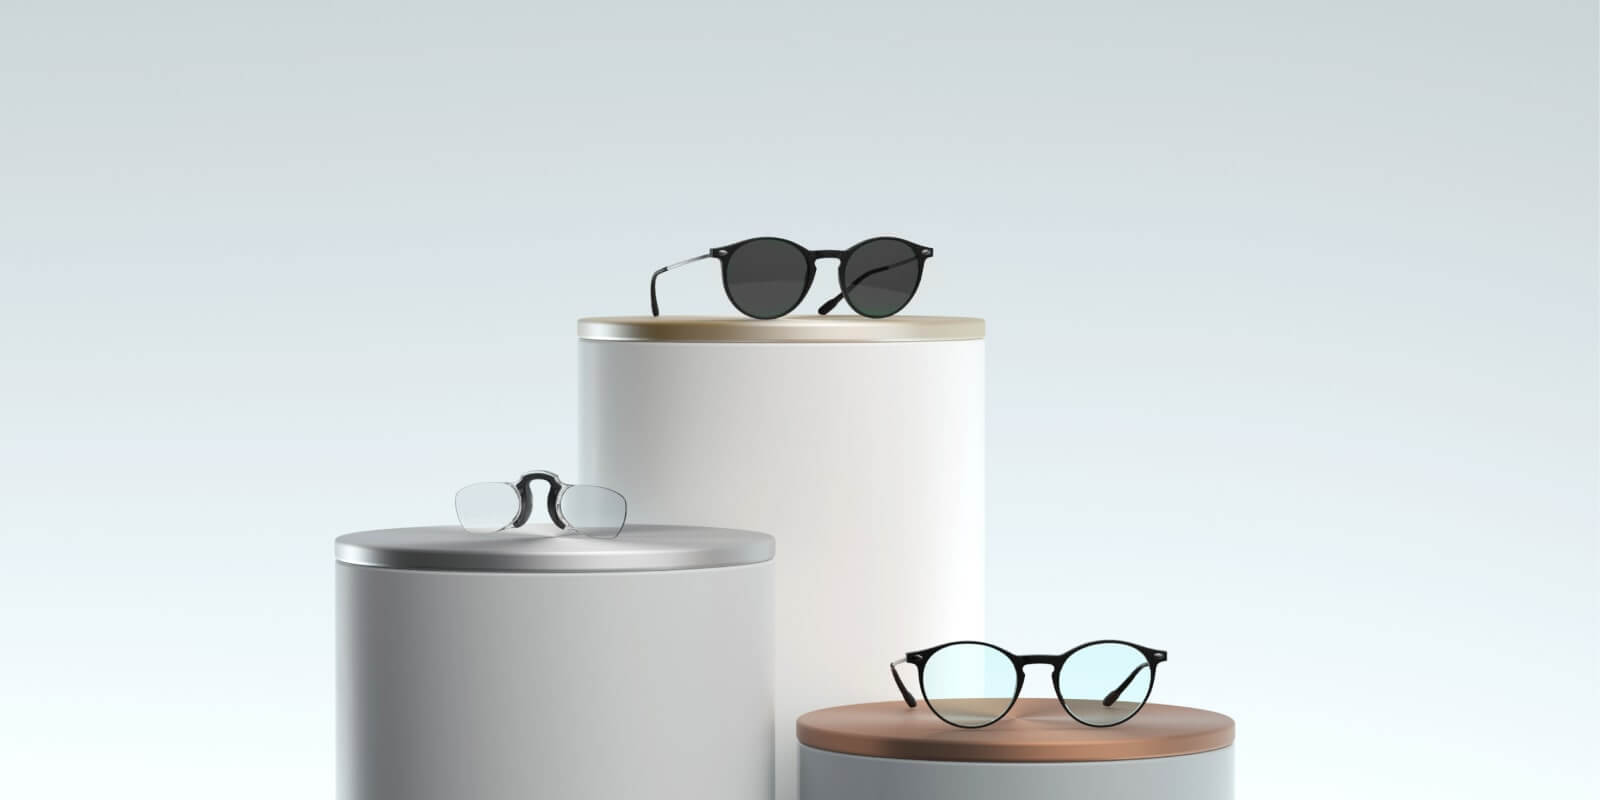 Several types of glasses on displays